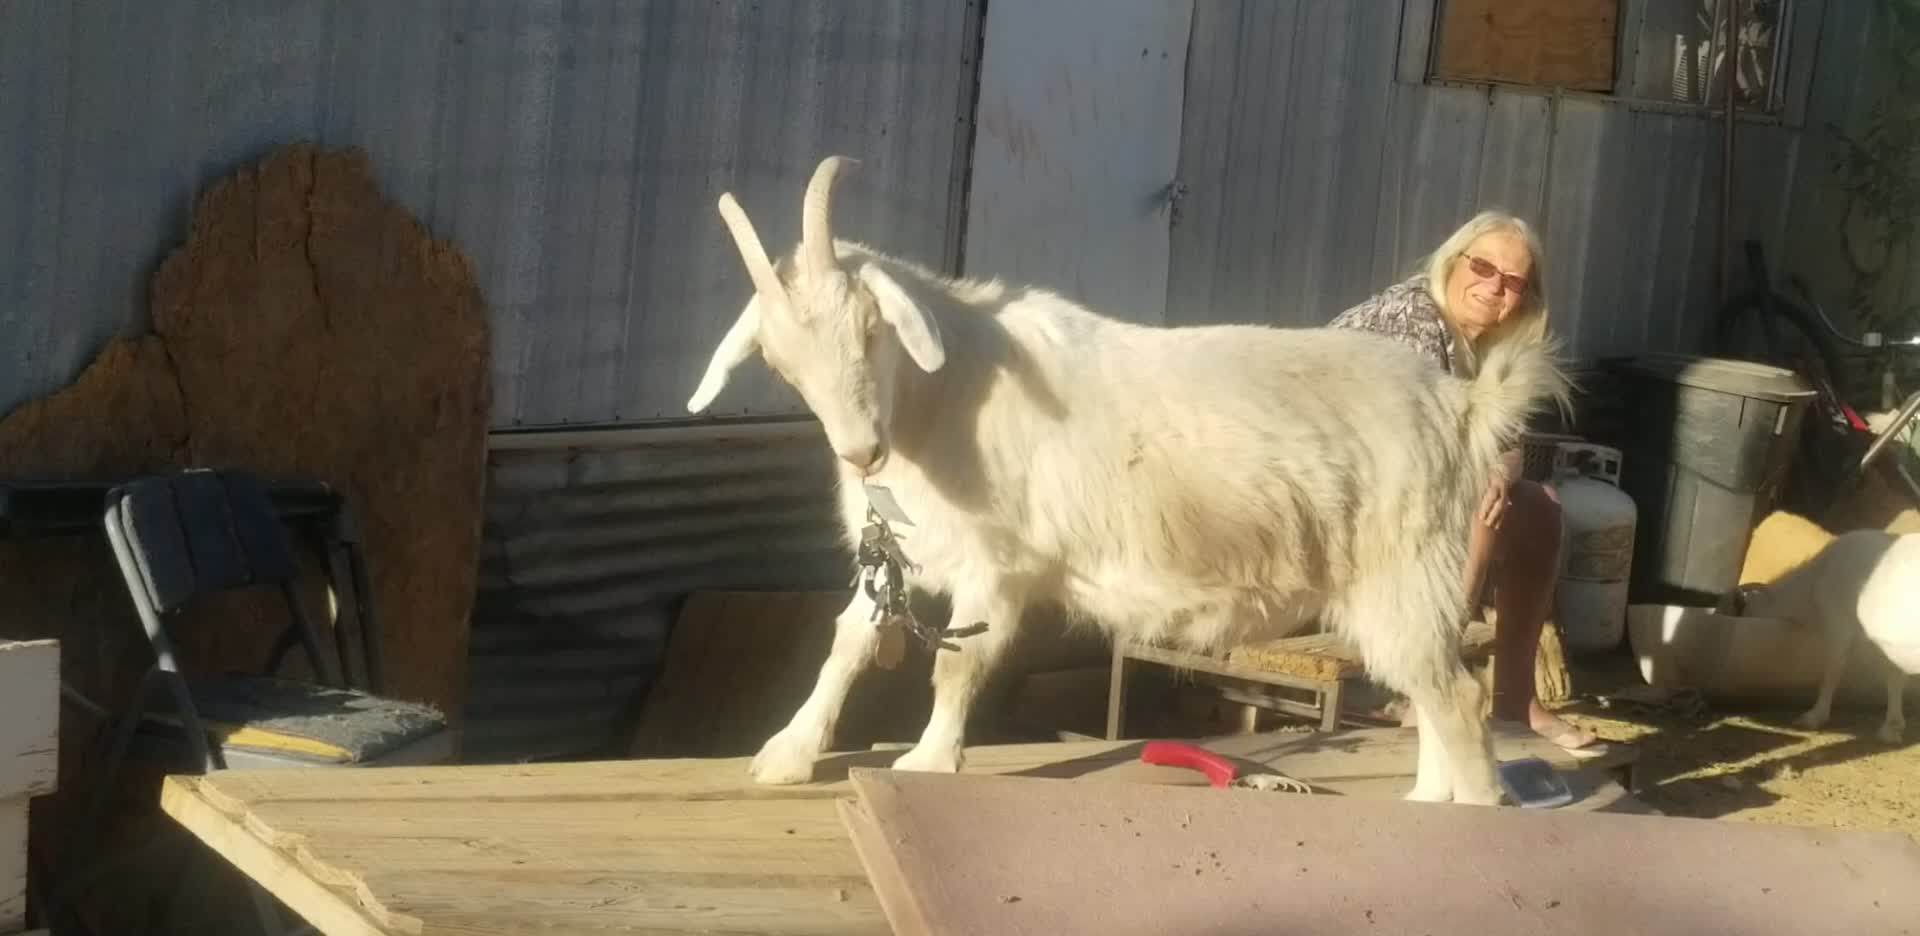 Wether Goat Plays With Bunch of Keys